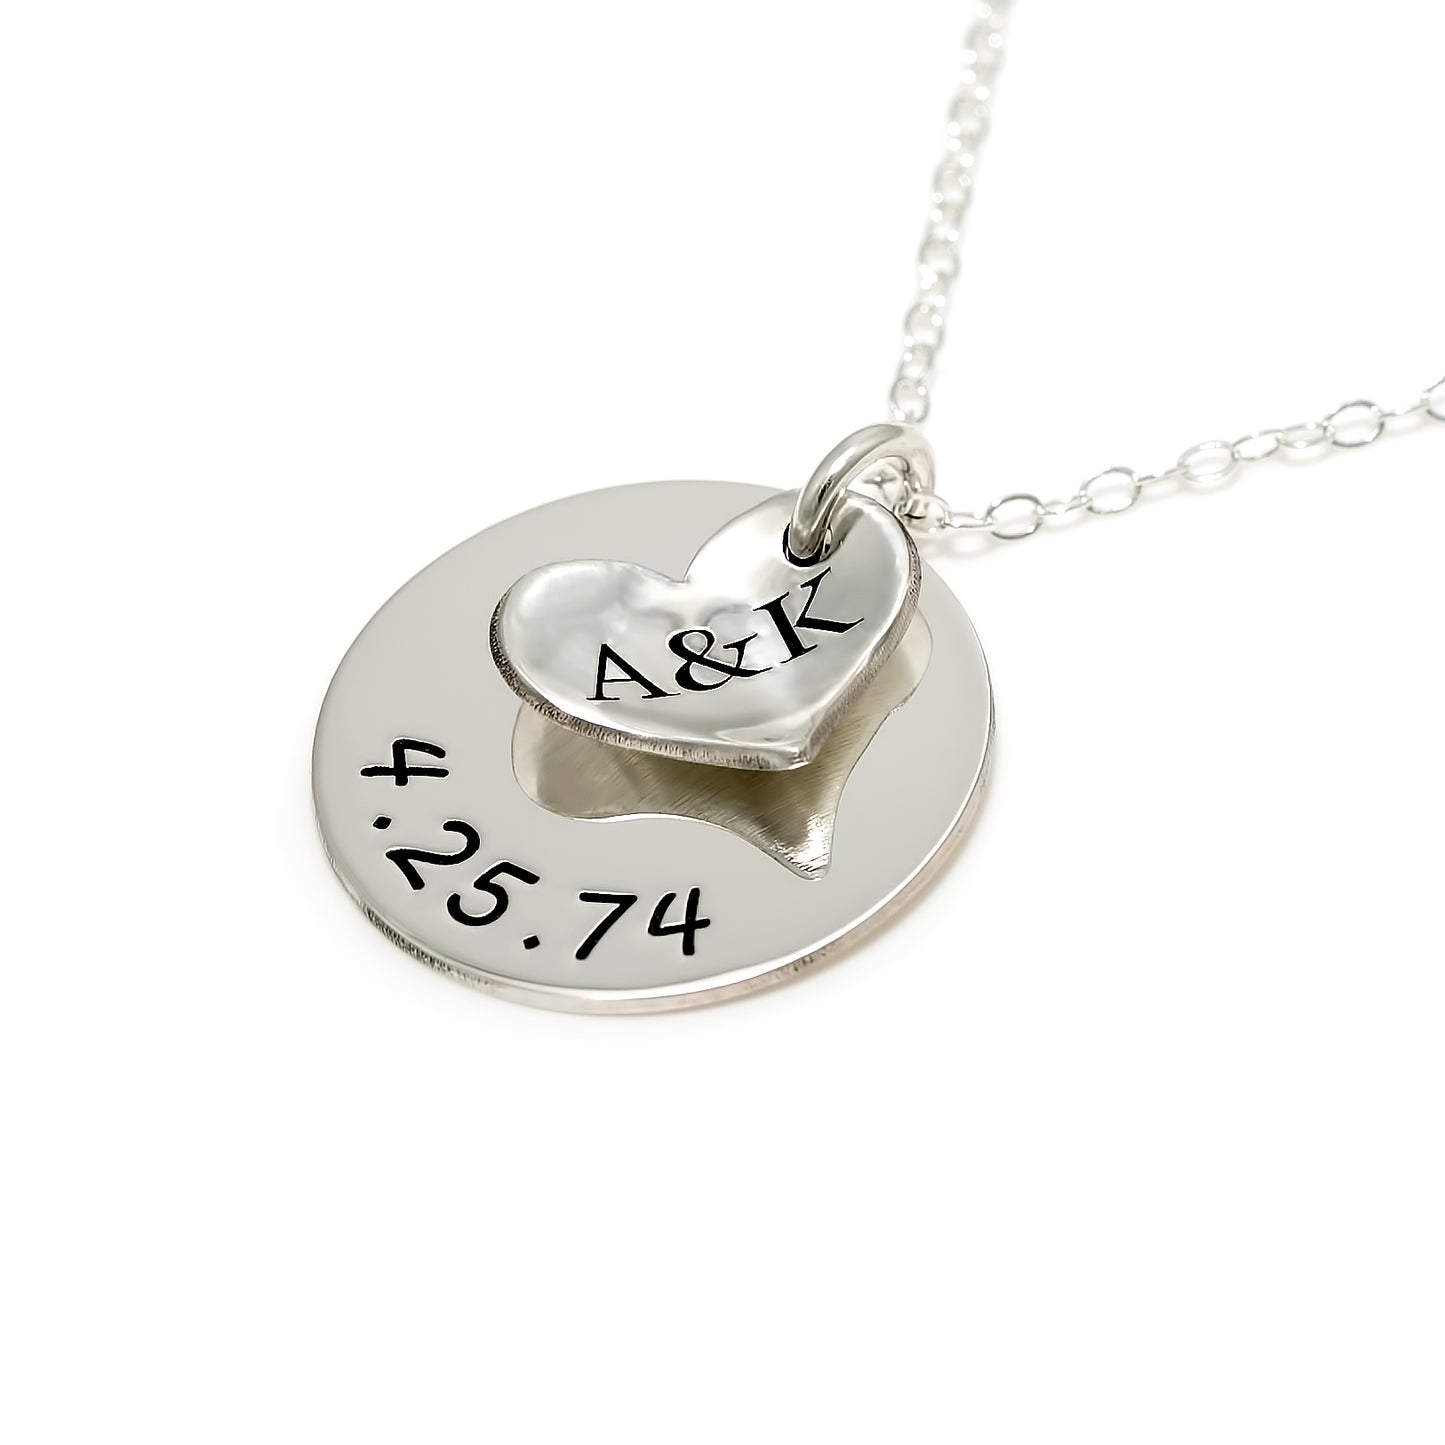 A Date to Remember Charm Necklace